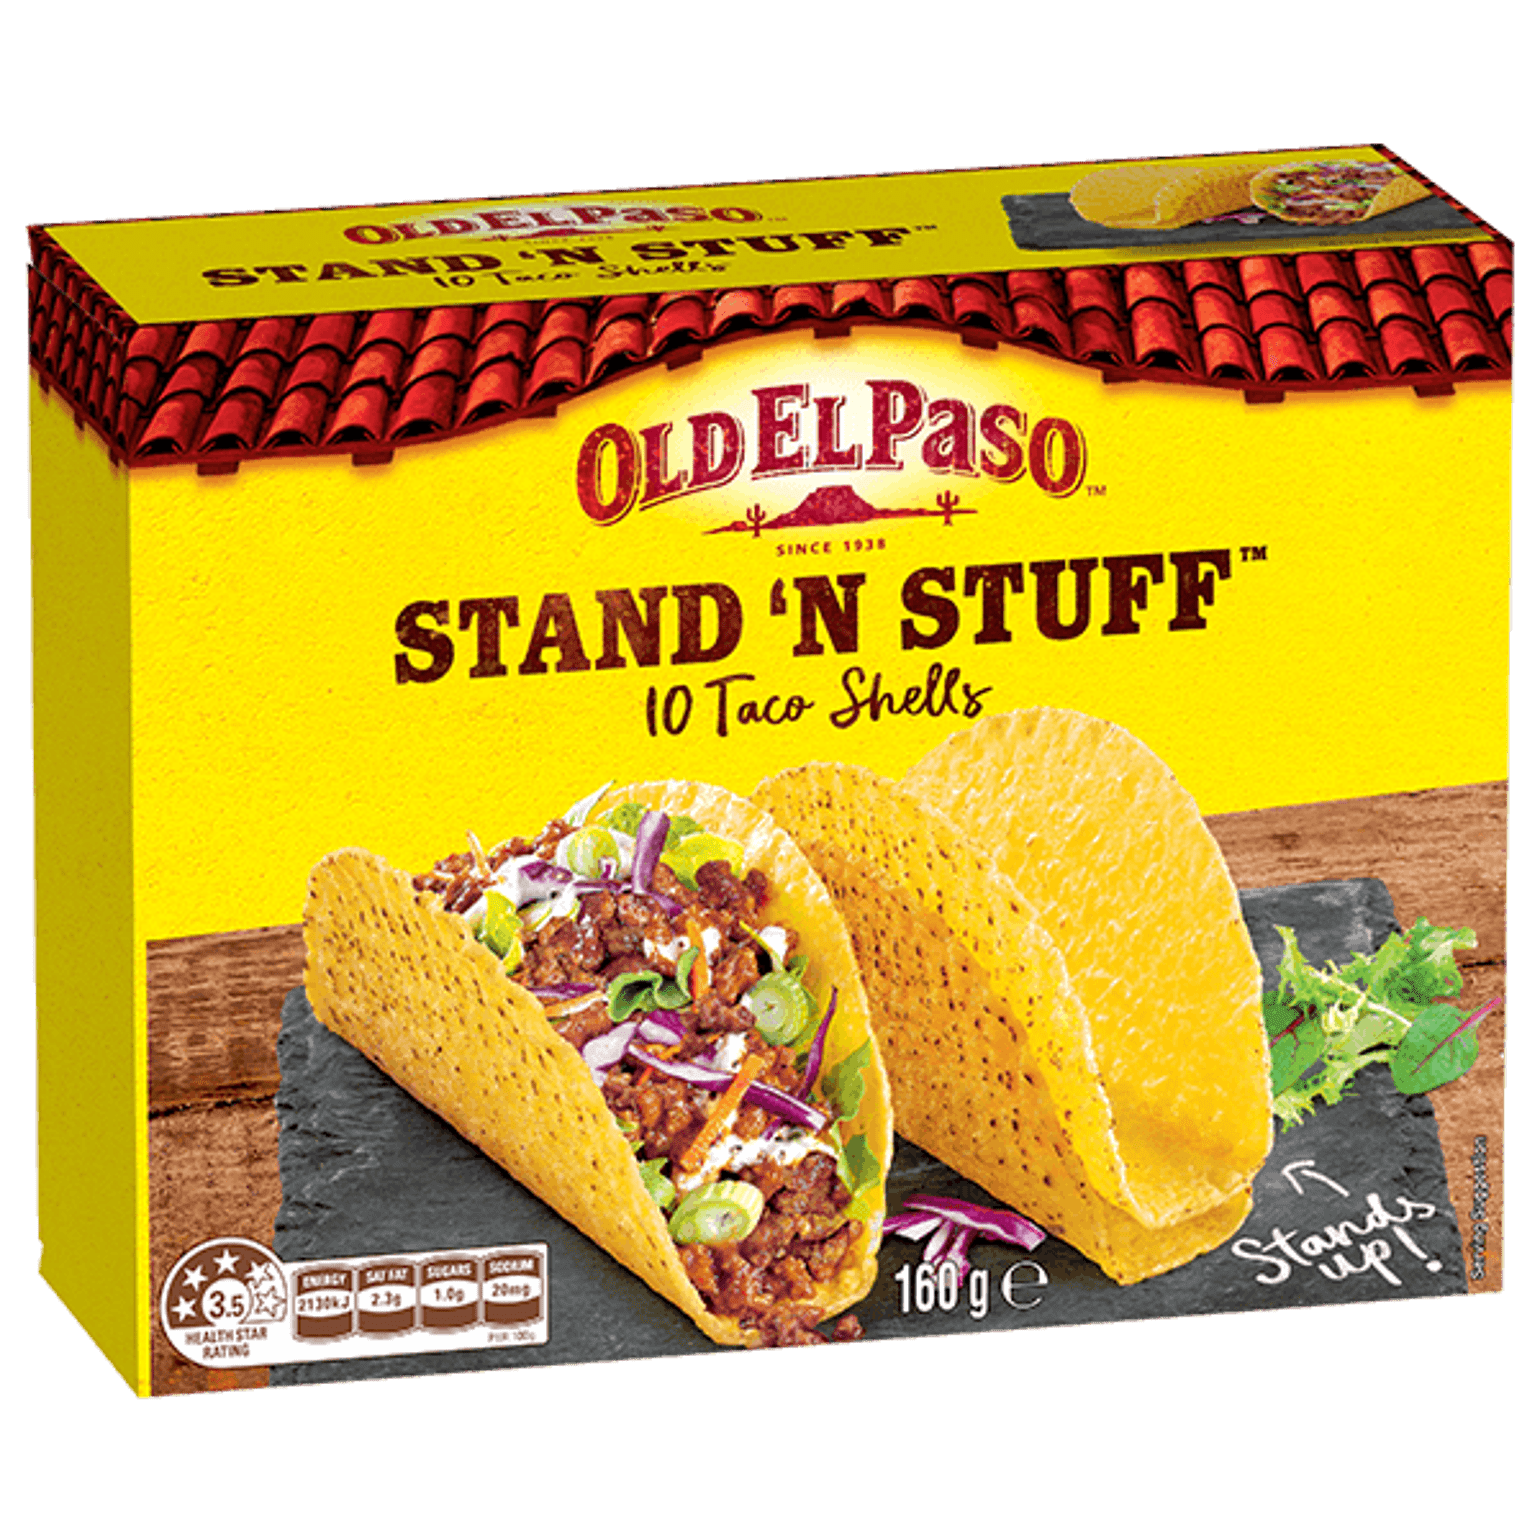 a pack of Old El Paso's stand n stuff 10 taco shells (190g)